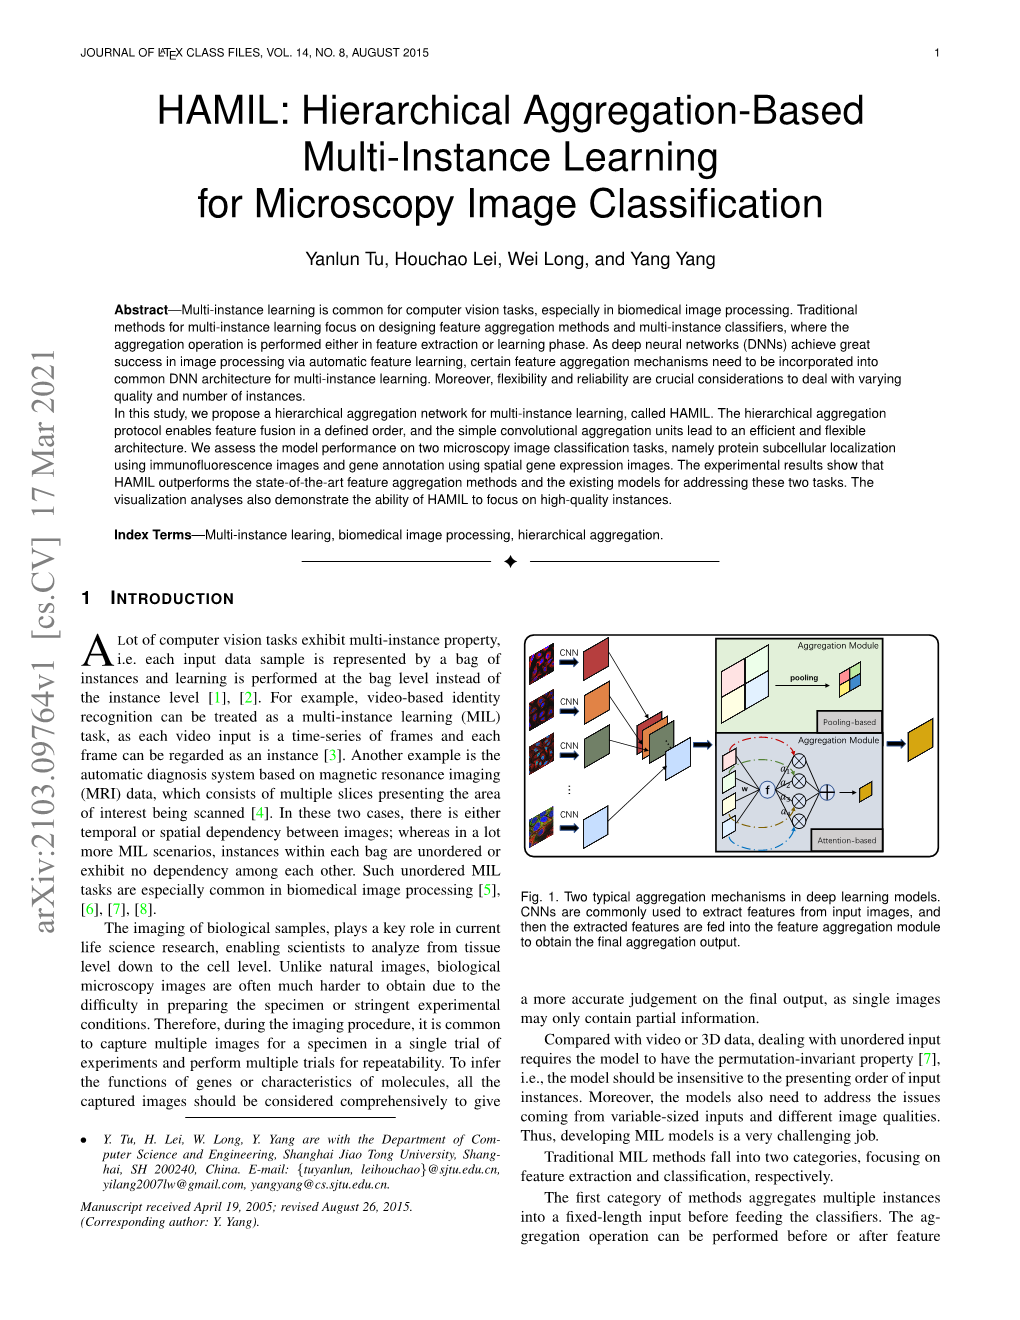 Hierarchical Aggregation-Based Multi-Instance Learning for Microscopy Image Classiﬁcation